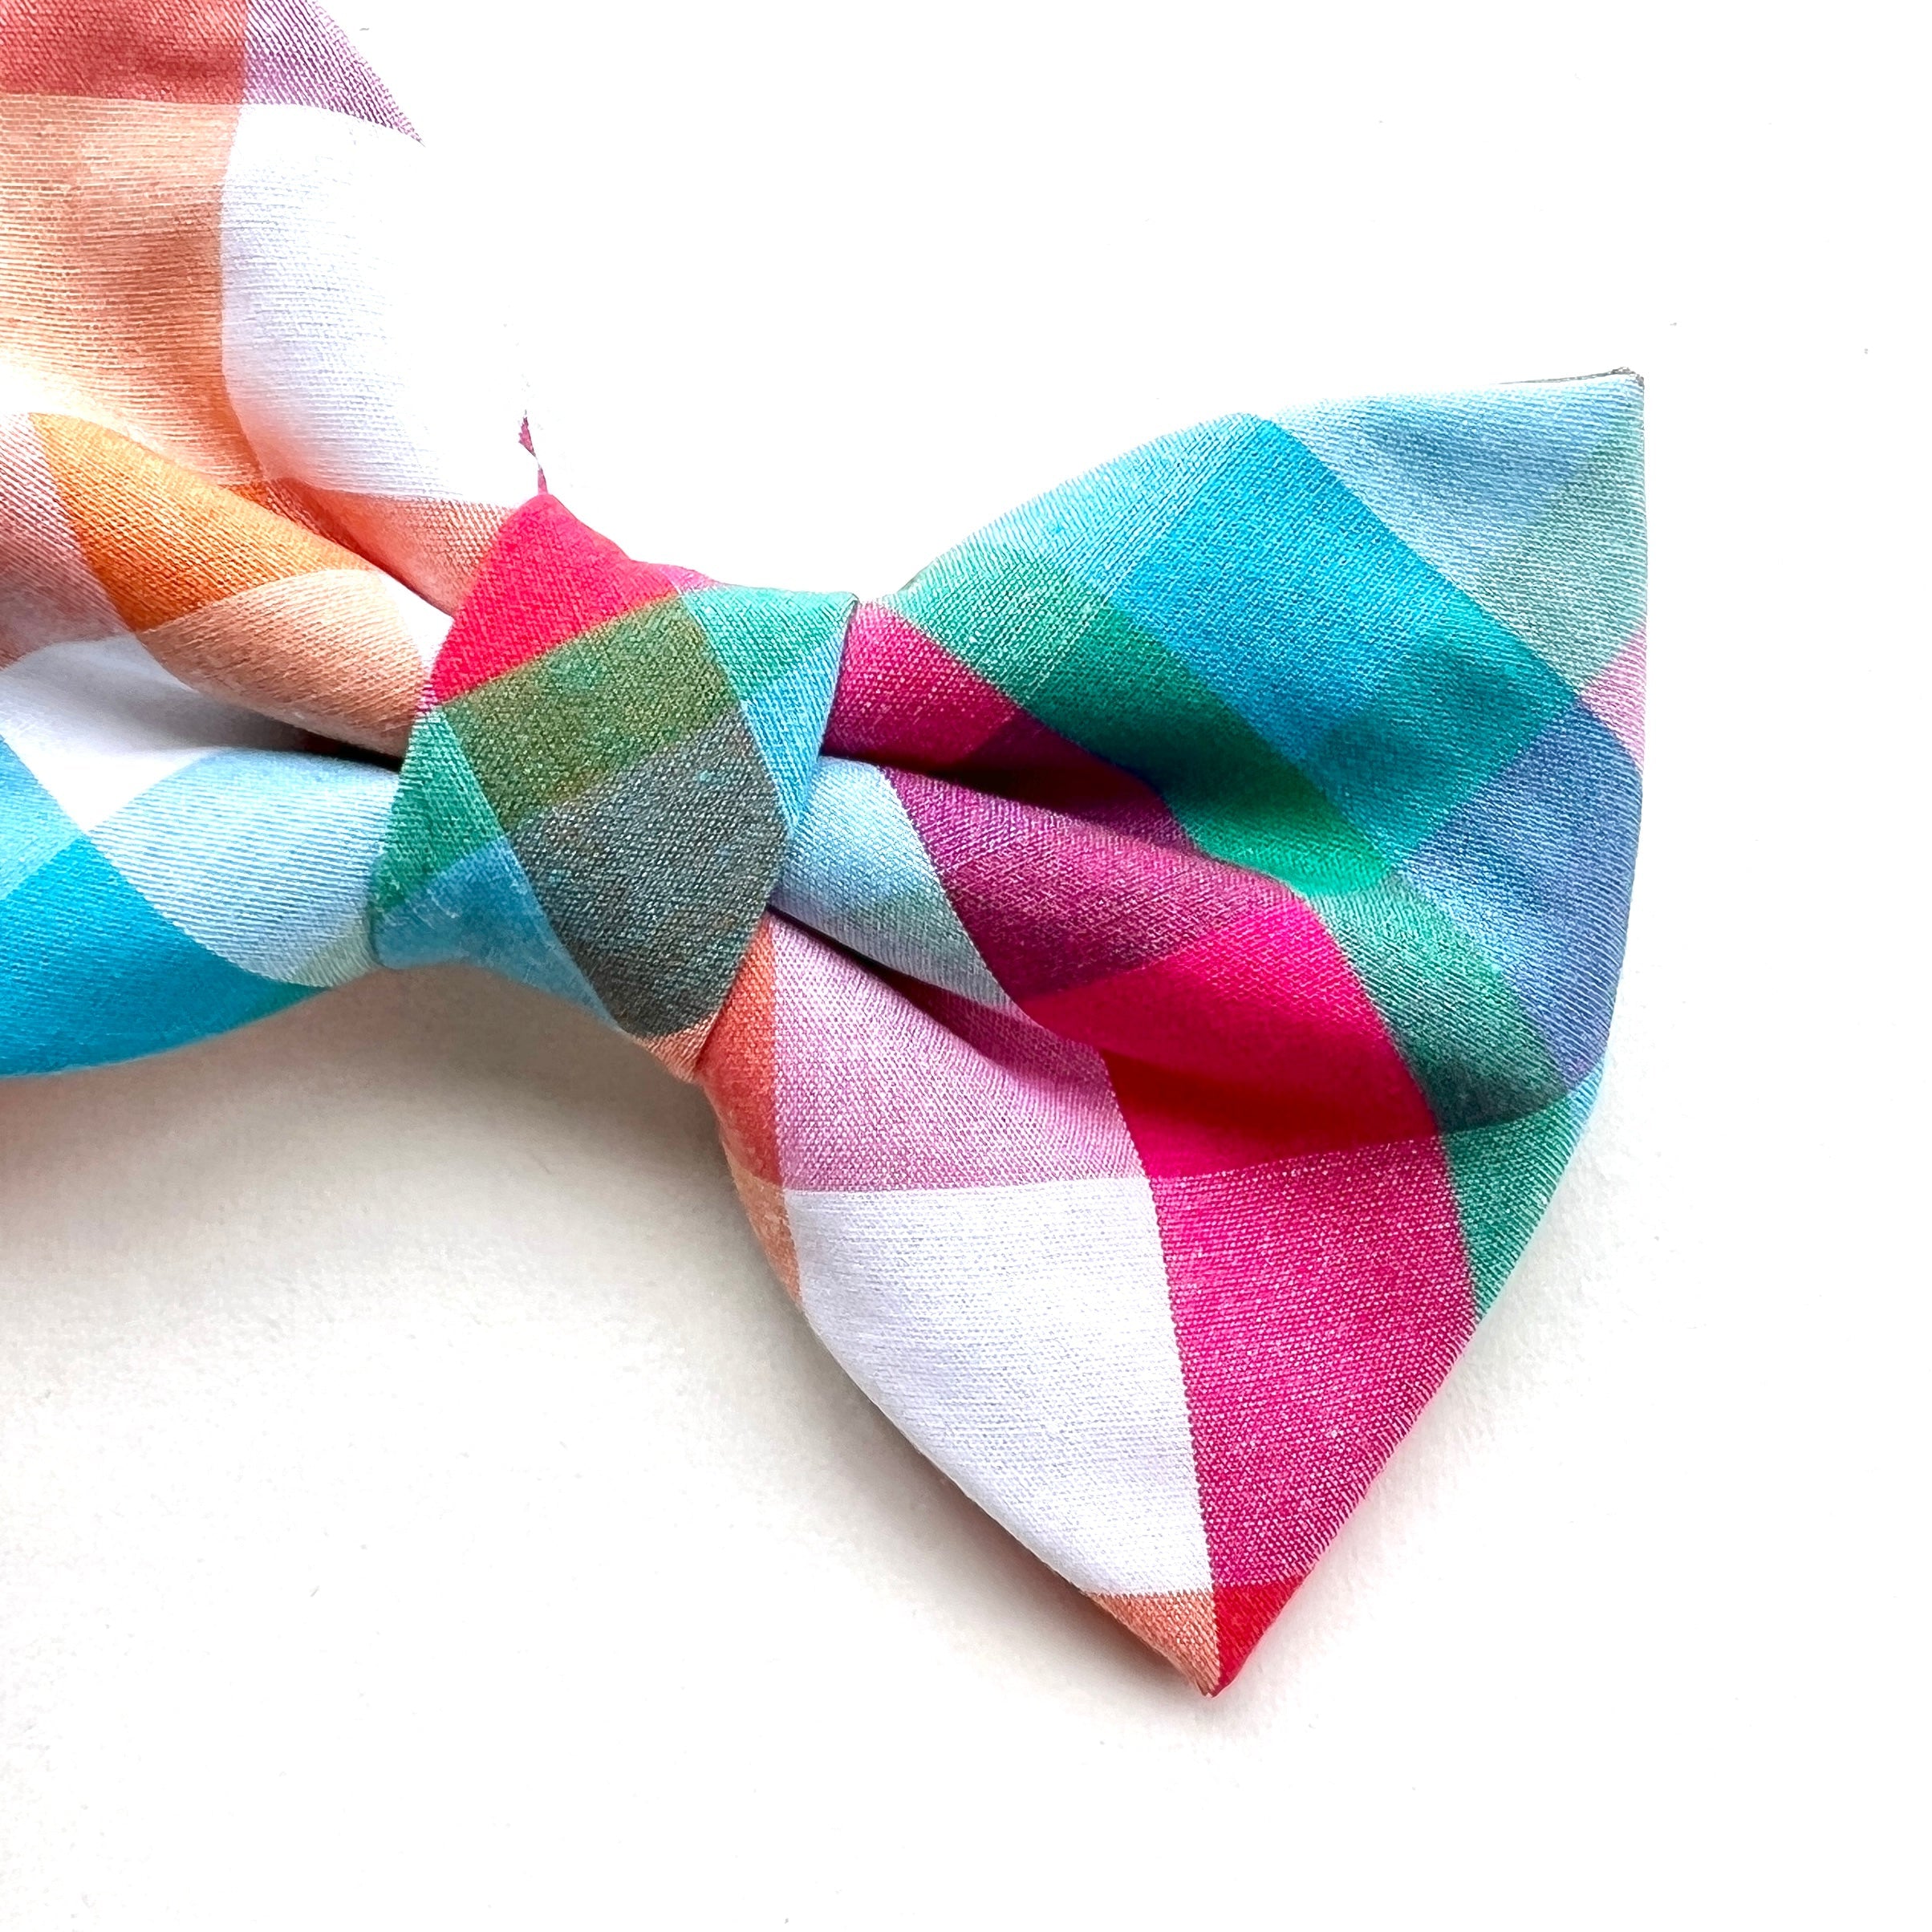 BALI - Bowtie Standard & Large // READY TO SHIP